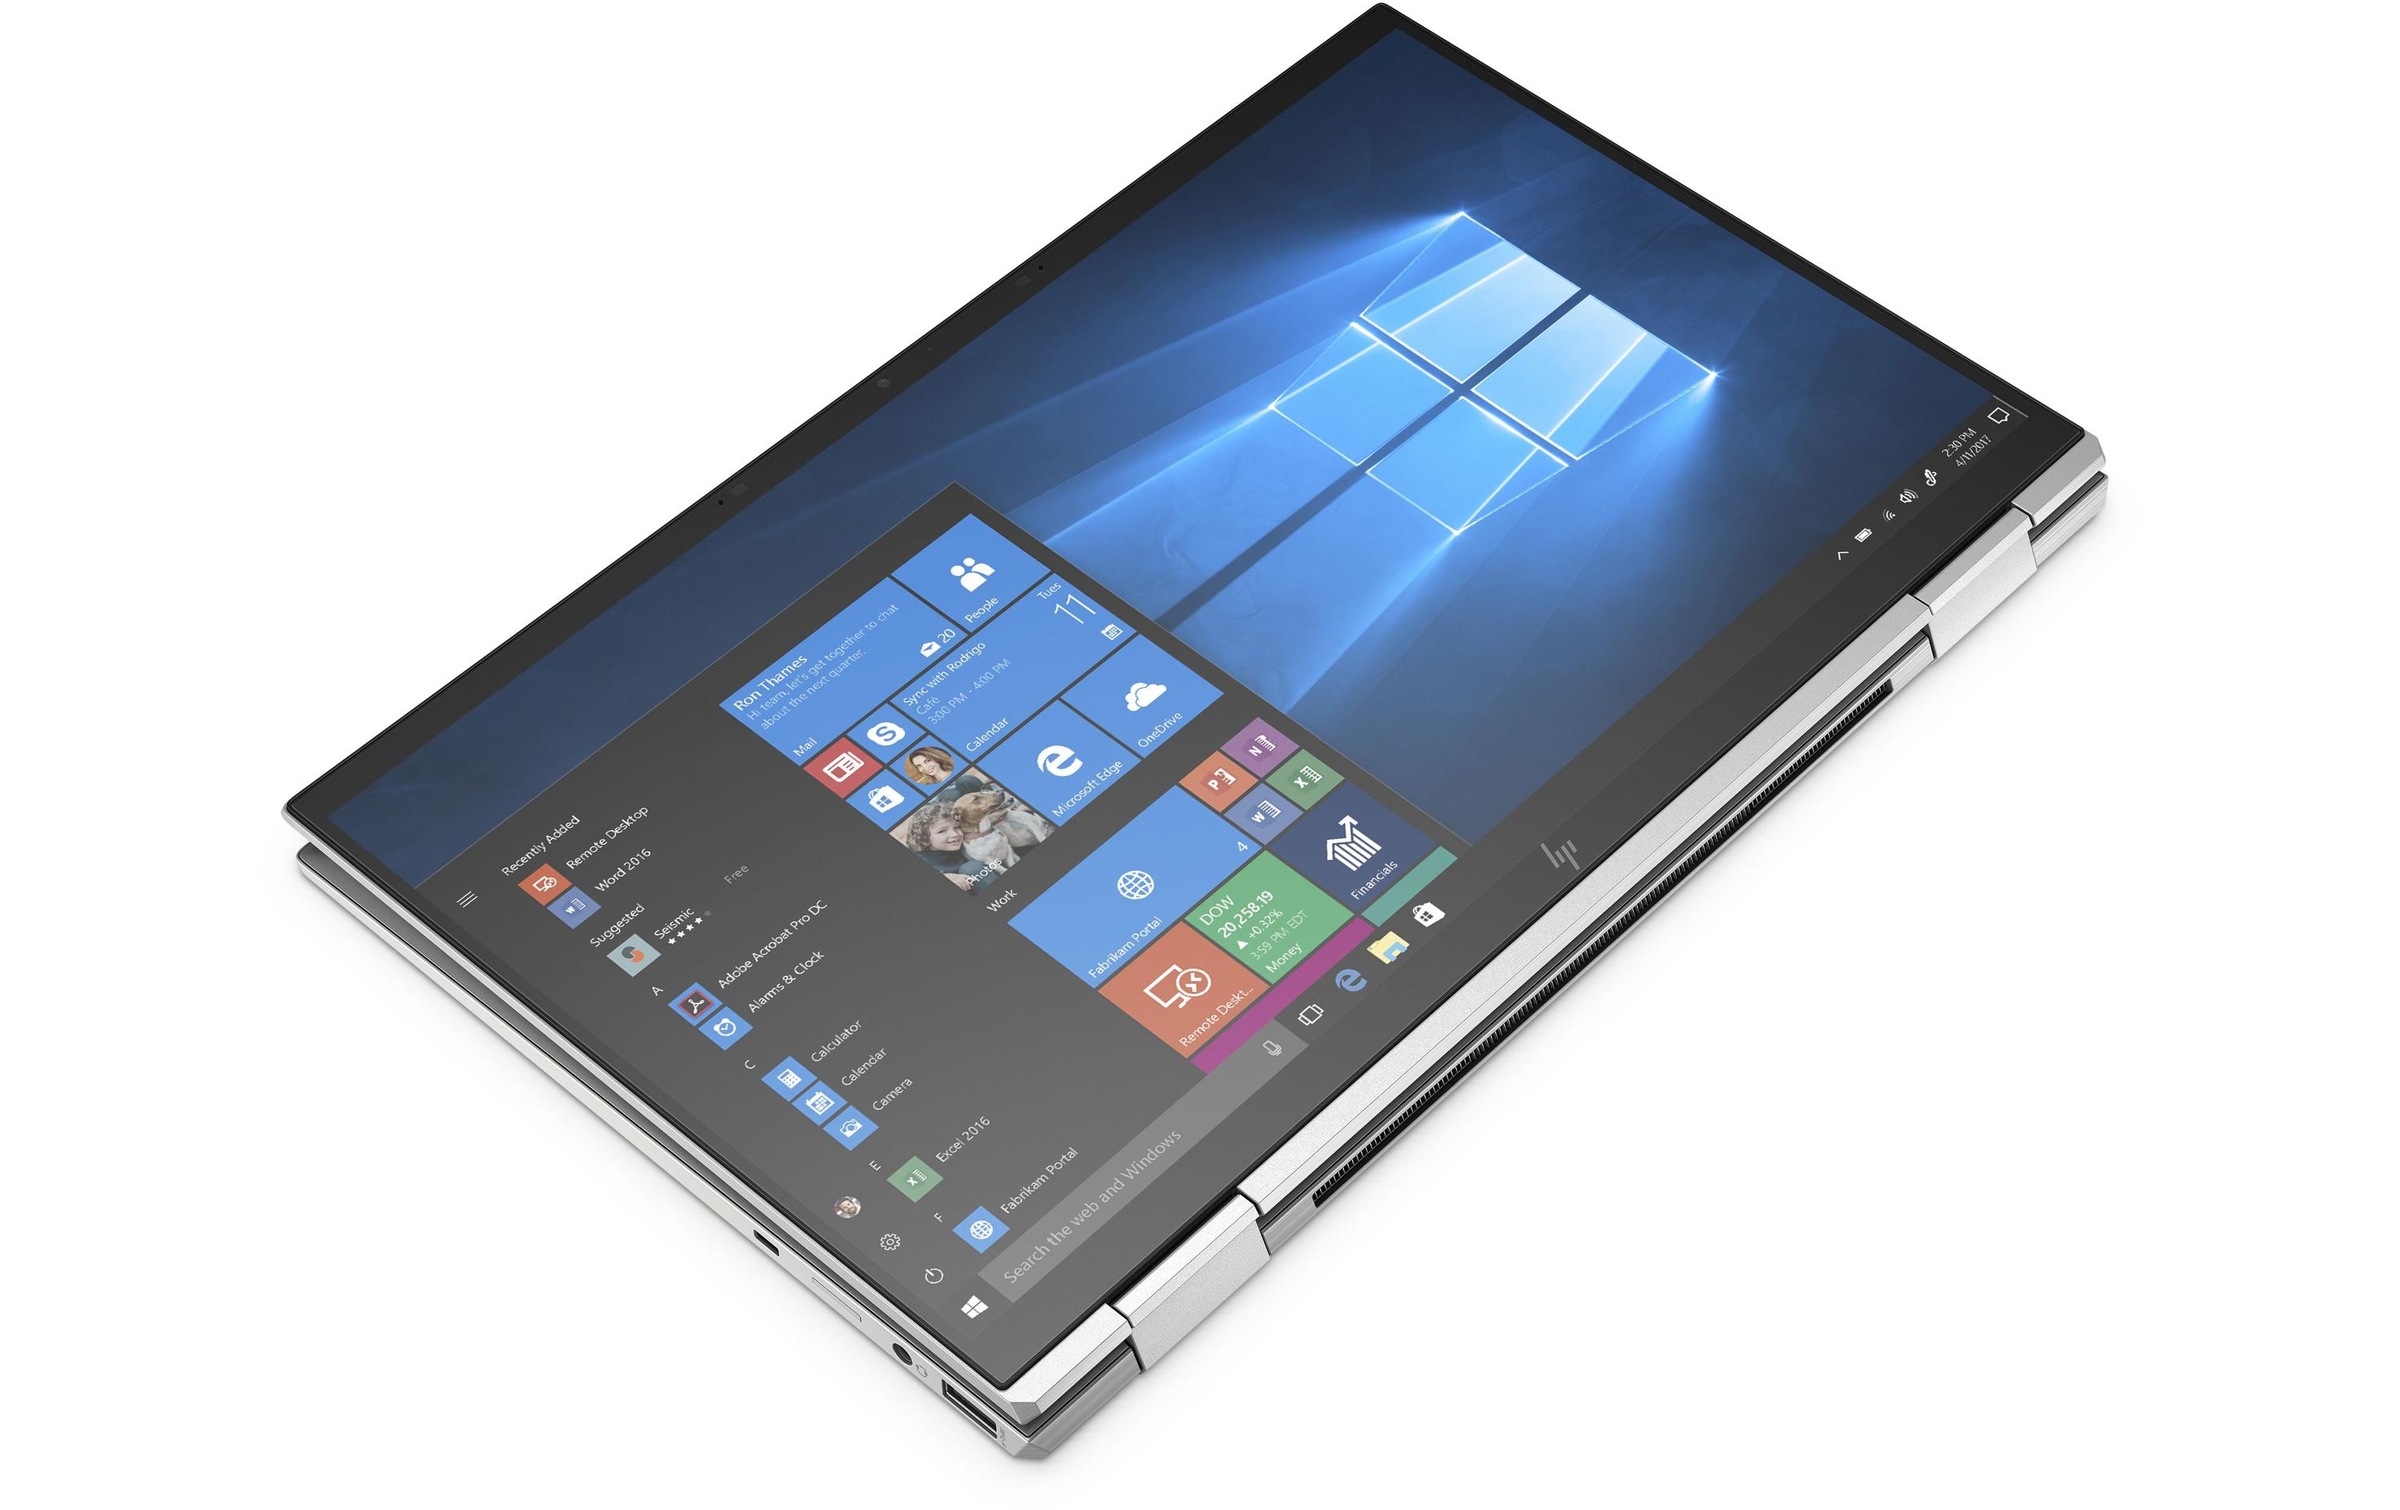 HP Notebook »x360 1030 G7 229P6EA SureView Reflect«, 33,8 cm, / 13,3 Zoll, Intel, Core i7, 512 GB SSD